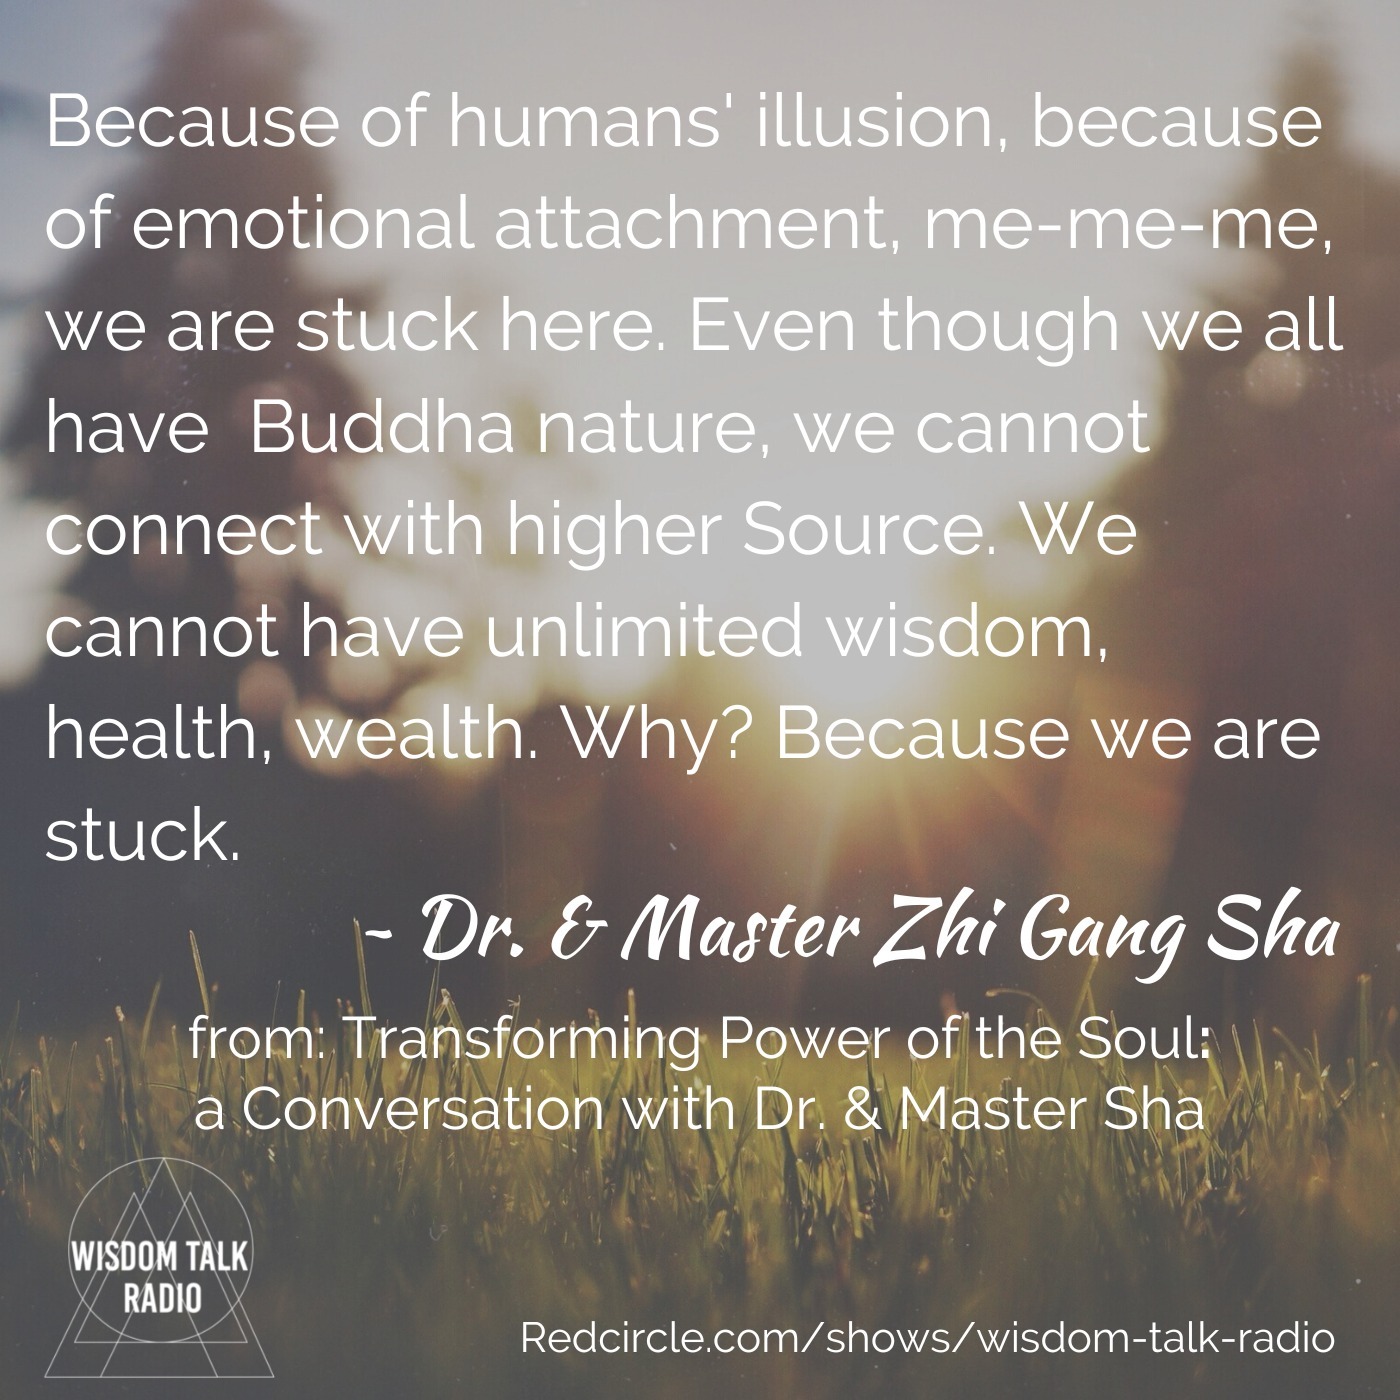 Transforming Power of the Soul: a Conversation with Dr. and Master Zhi Gang Sha